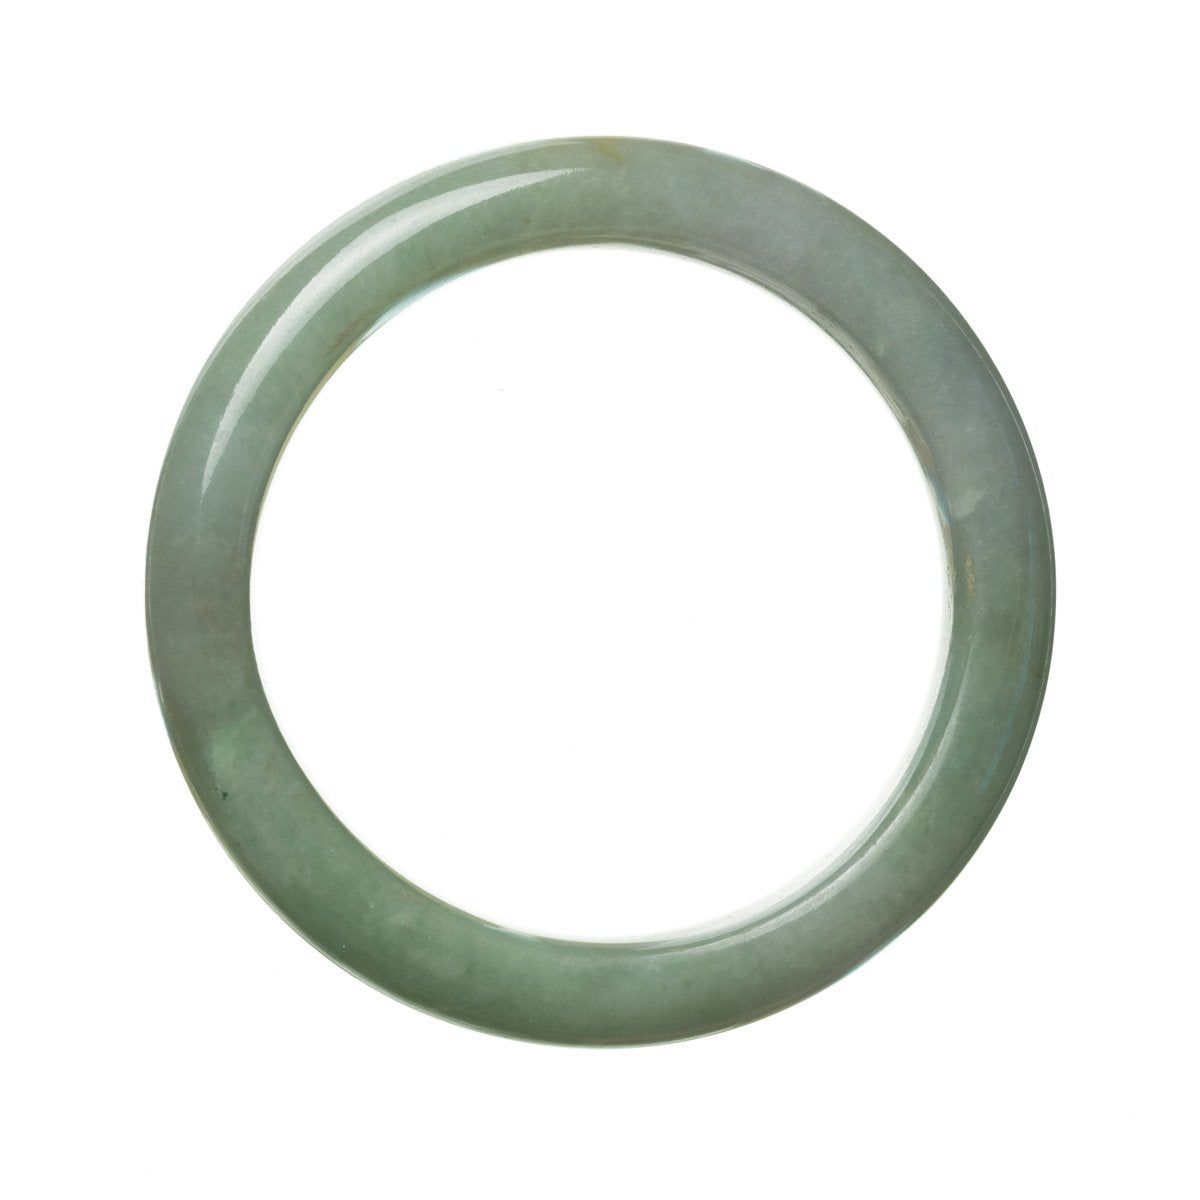 A close-up image of a semi-round, untreated green traditional jade bracelet with a diameter of 58mm. The bracelet is made of genuine jade and is sold by MAYS GEMS.